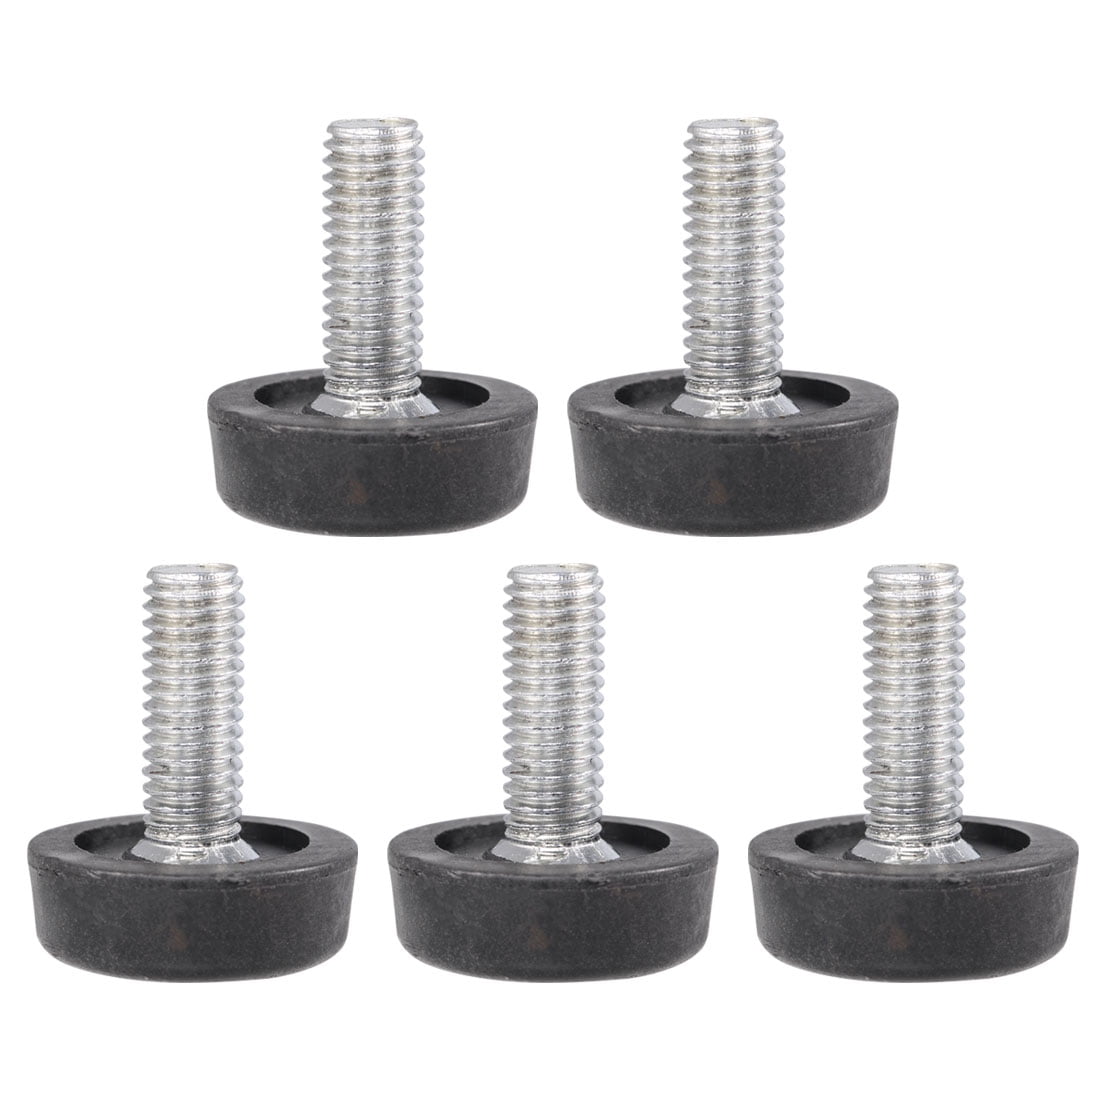 Adjustable M7 x 18mm Threaded Furniture Bed Leveling Glide Feet 20 Pcs 